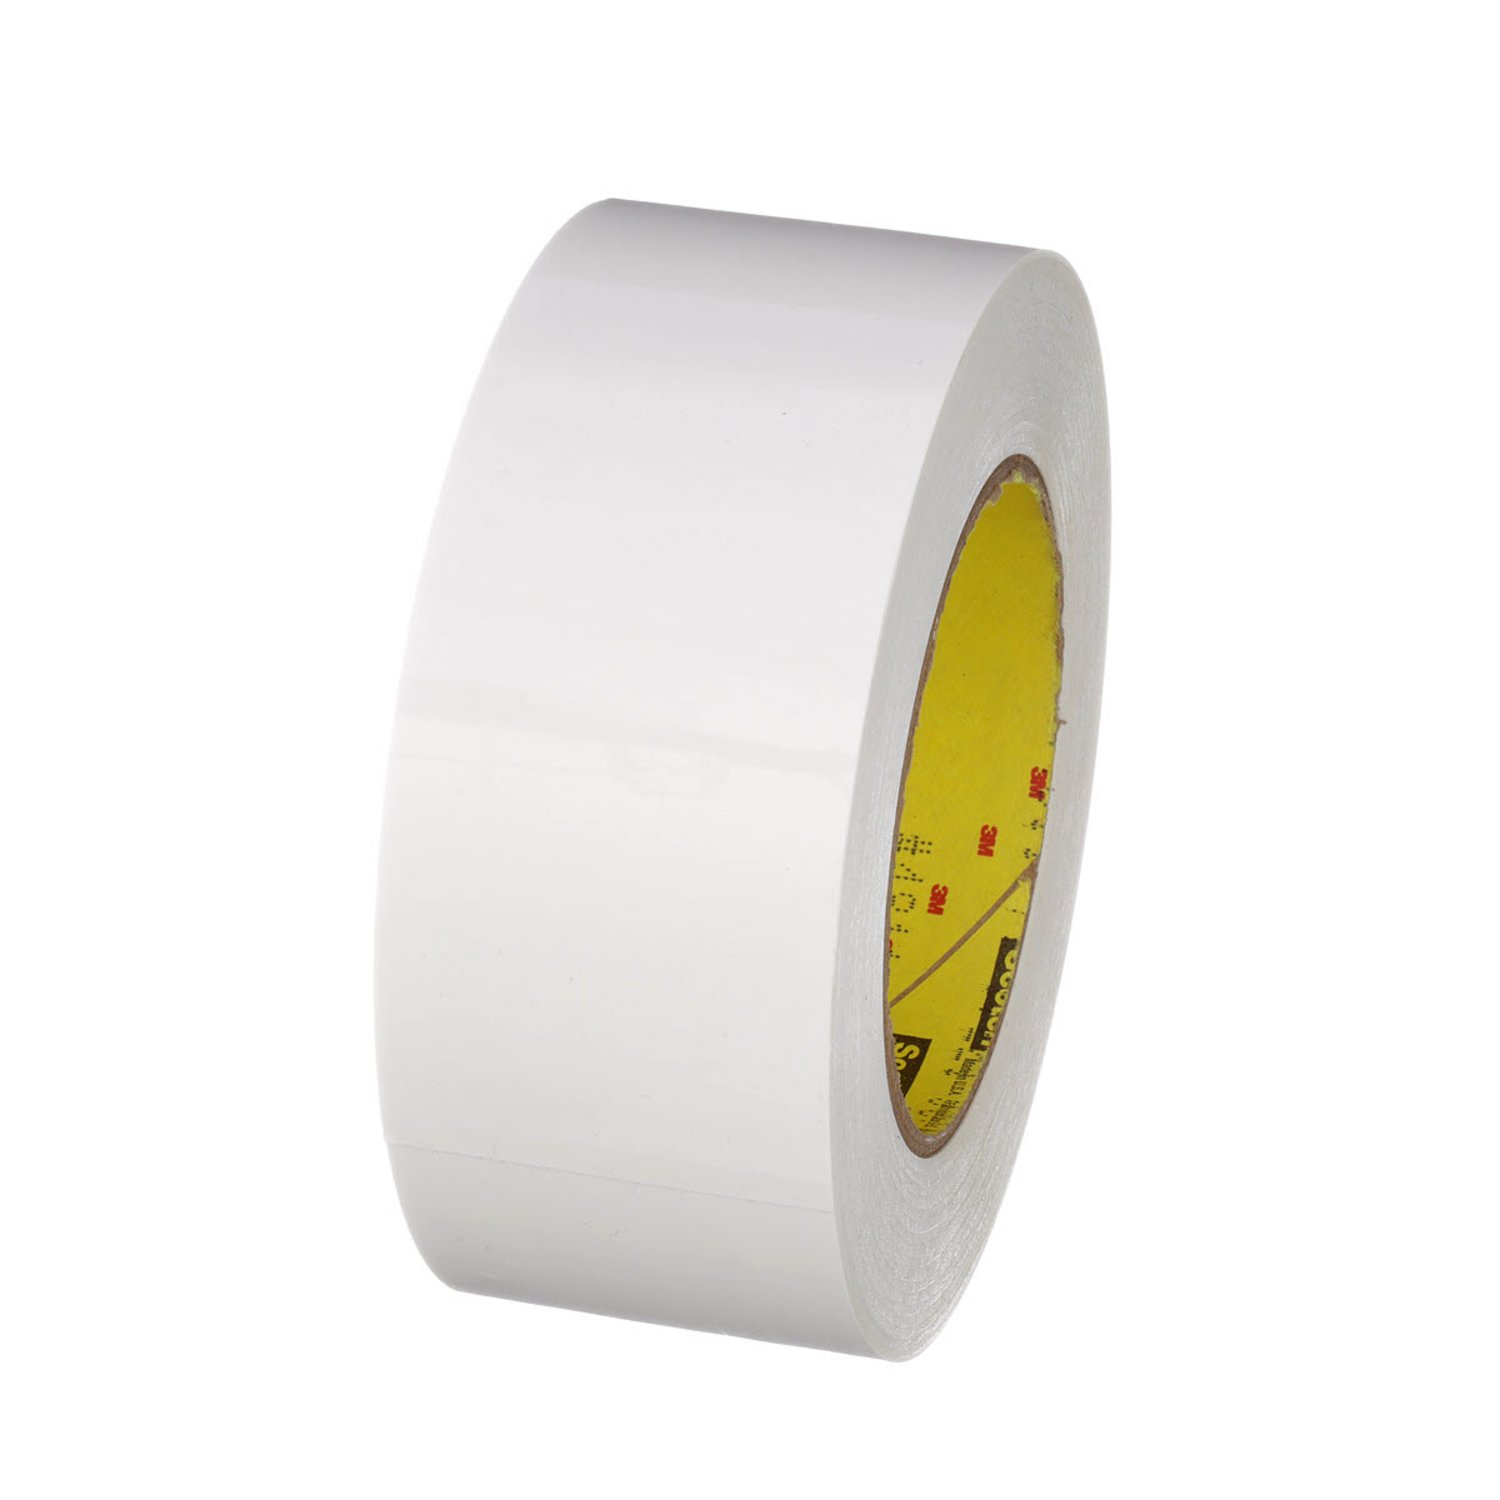 7100066564 - 3M Preservation Sealing Tape 4811, White, 1 in x 36 yd, 9.5 mil, 36
rolls per case